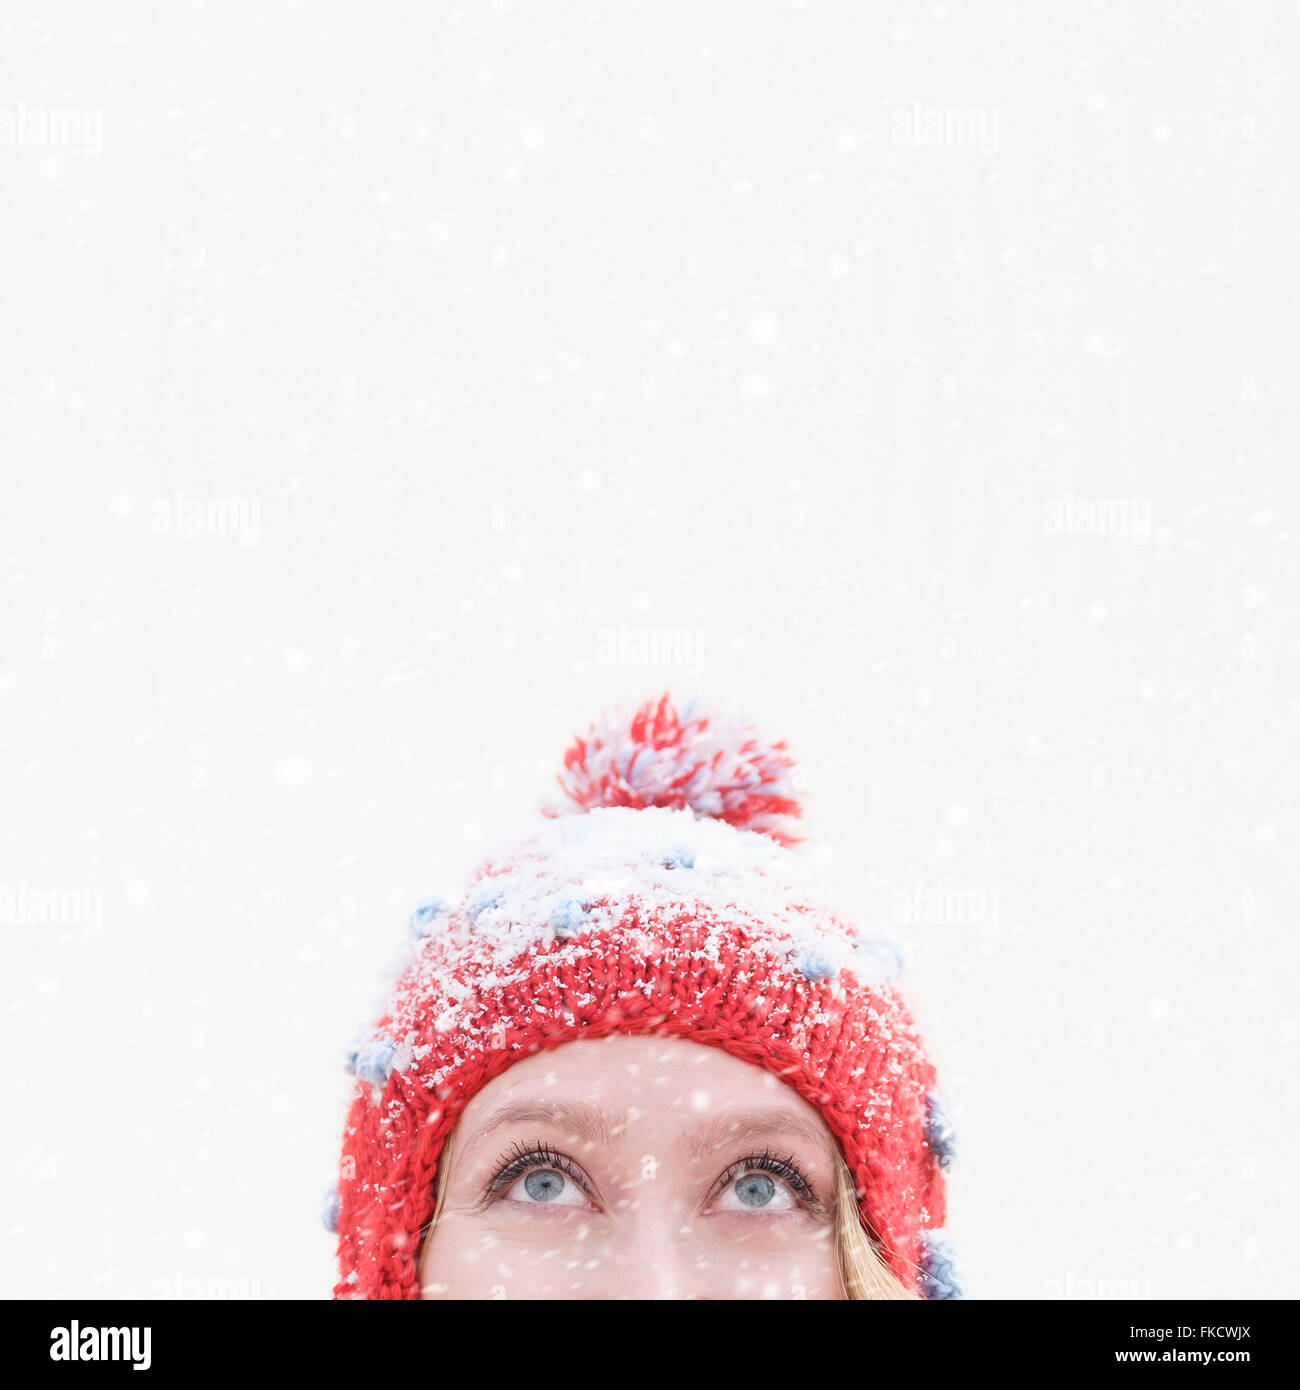 Woman in red knit hat looking up Stock Photo